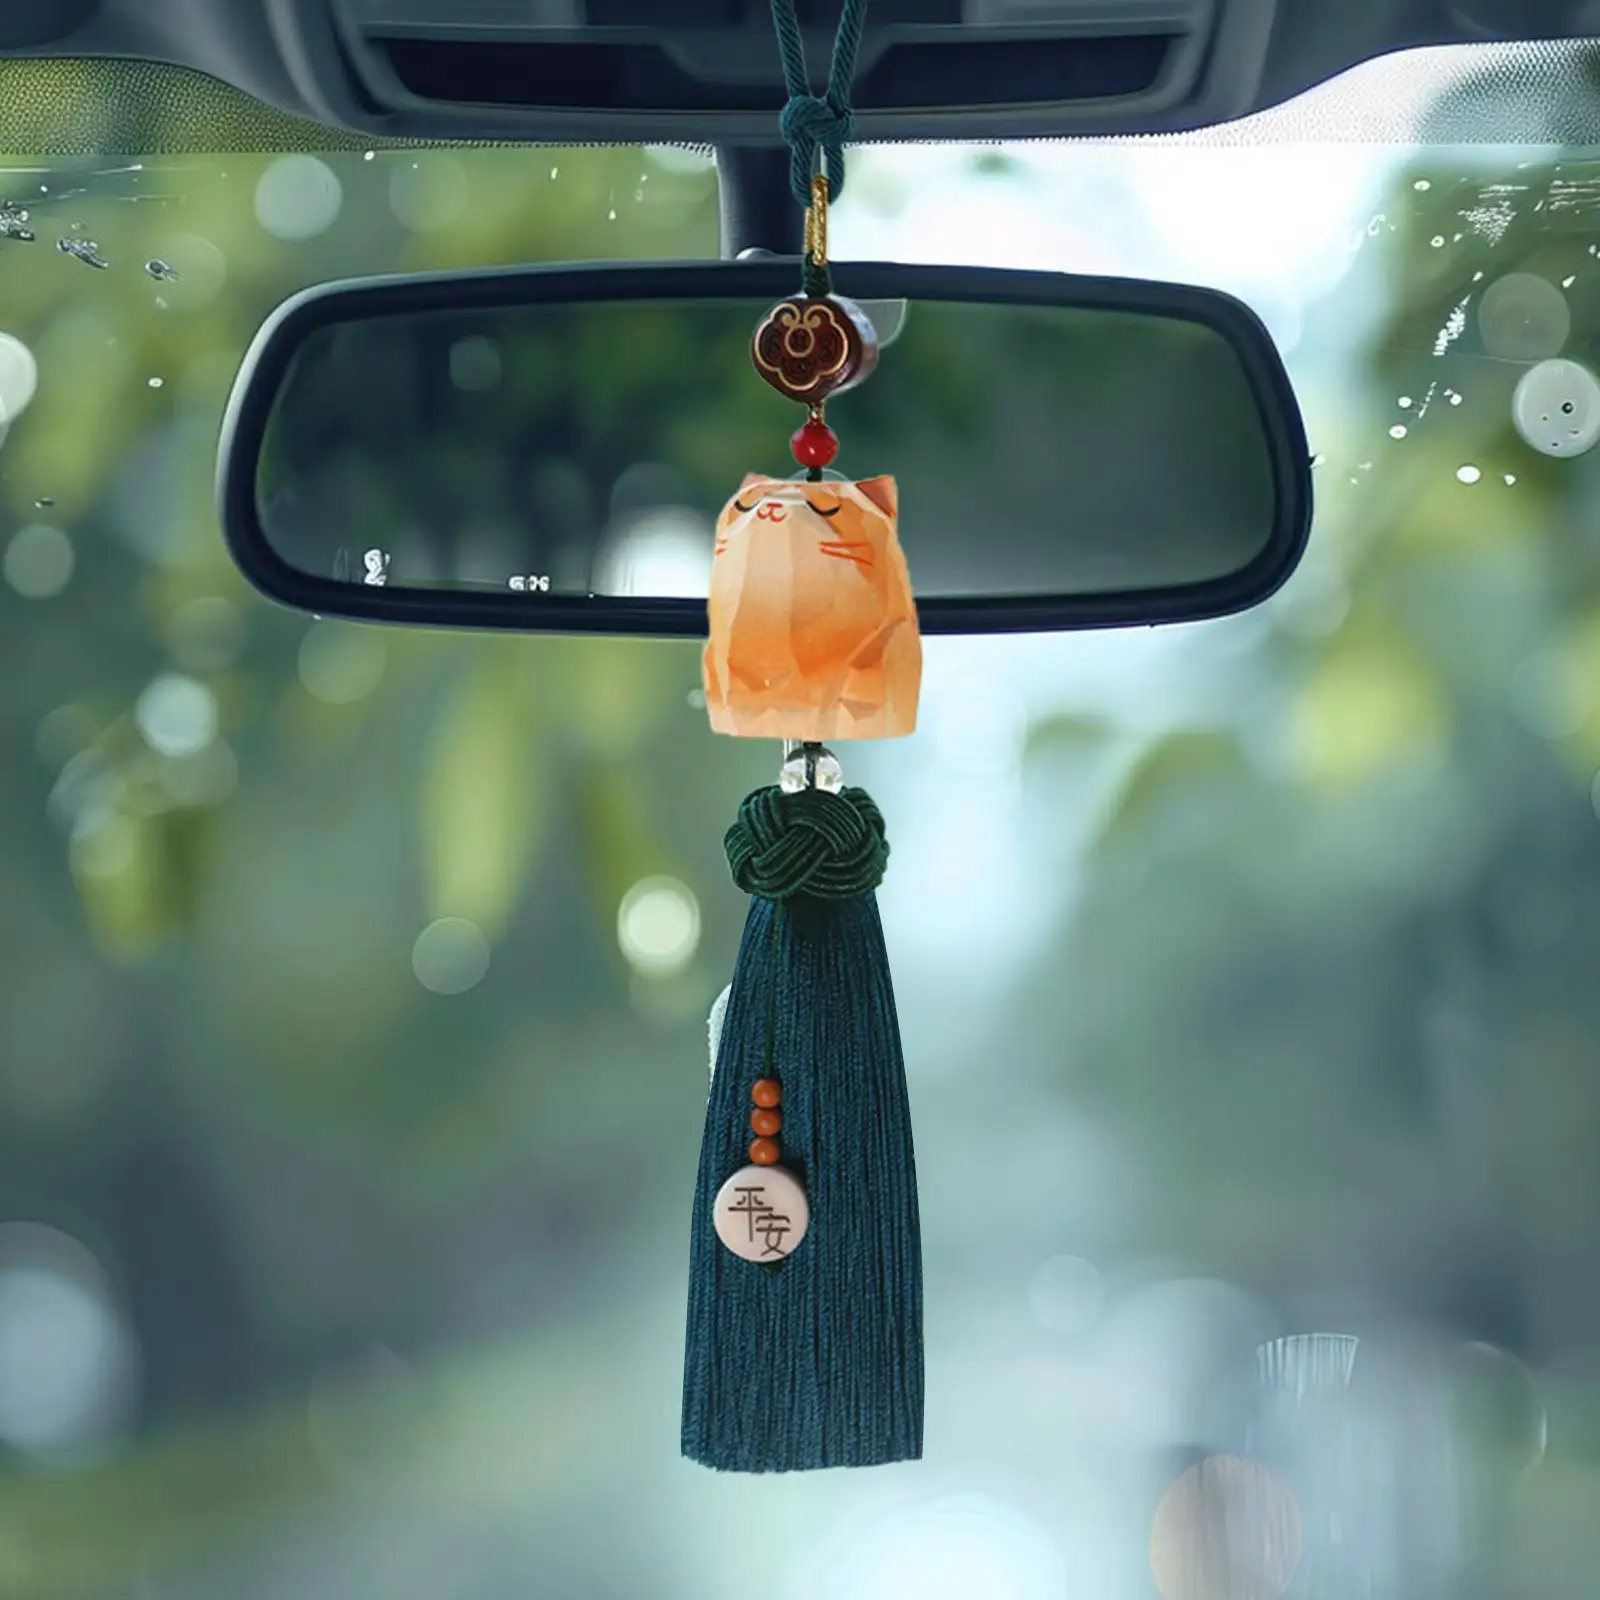 Auto Rearview Mirror Pendant Cute Orange Cat for Office Window Party